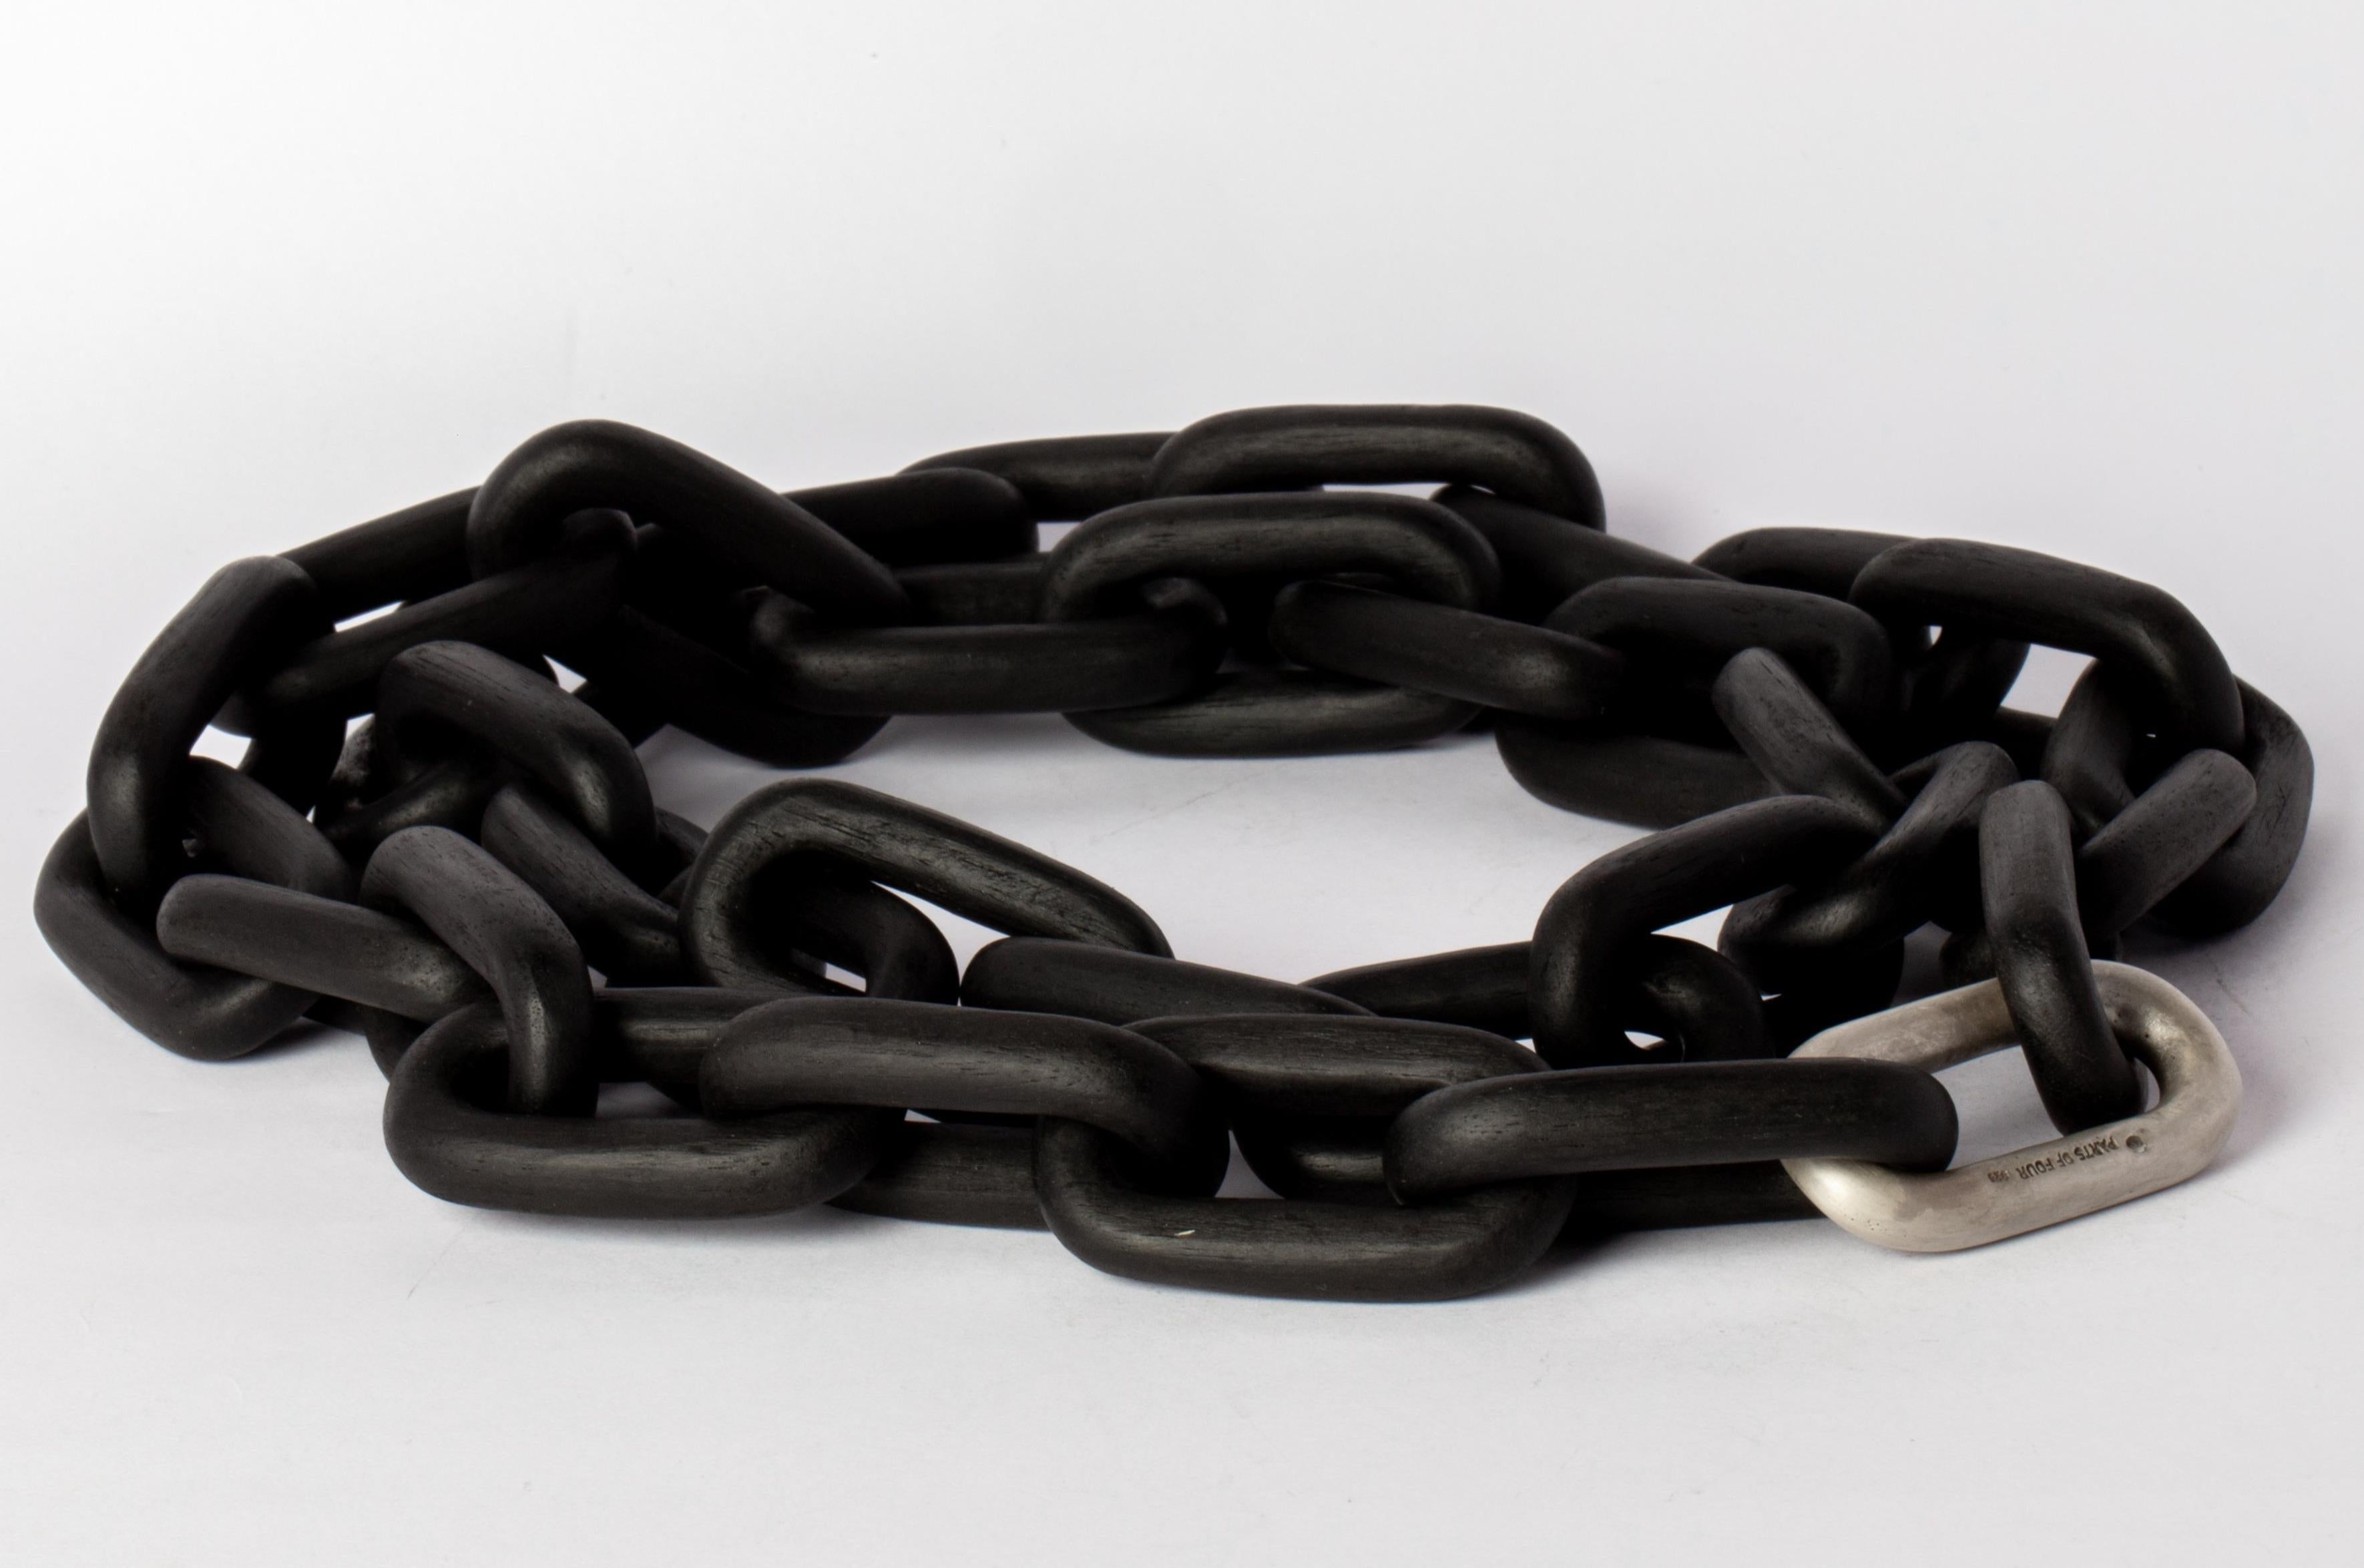 All organic chain is carved by hand. In the case of the chains made of wood, they are absolutely seamless; carved from a single long slab of wood (see link). Sterling silver, dipped in acid to create a subdued surface.
The Charm System is an